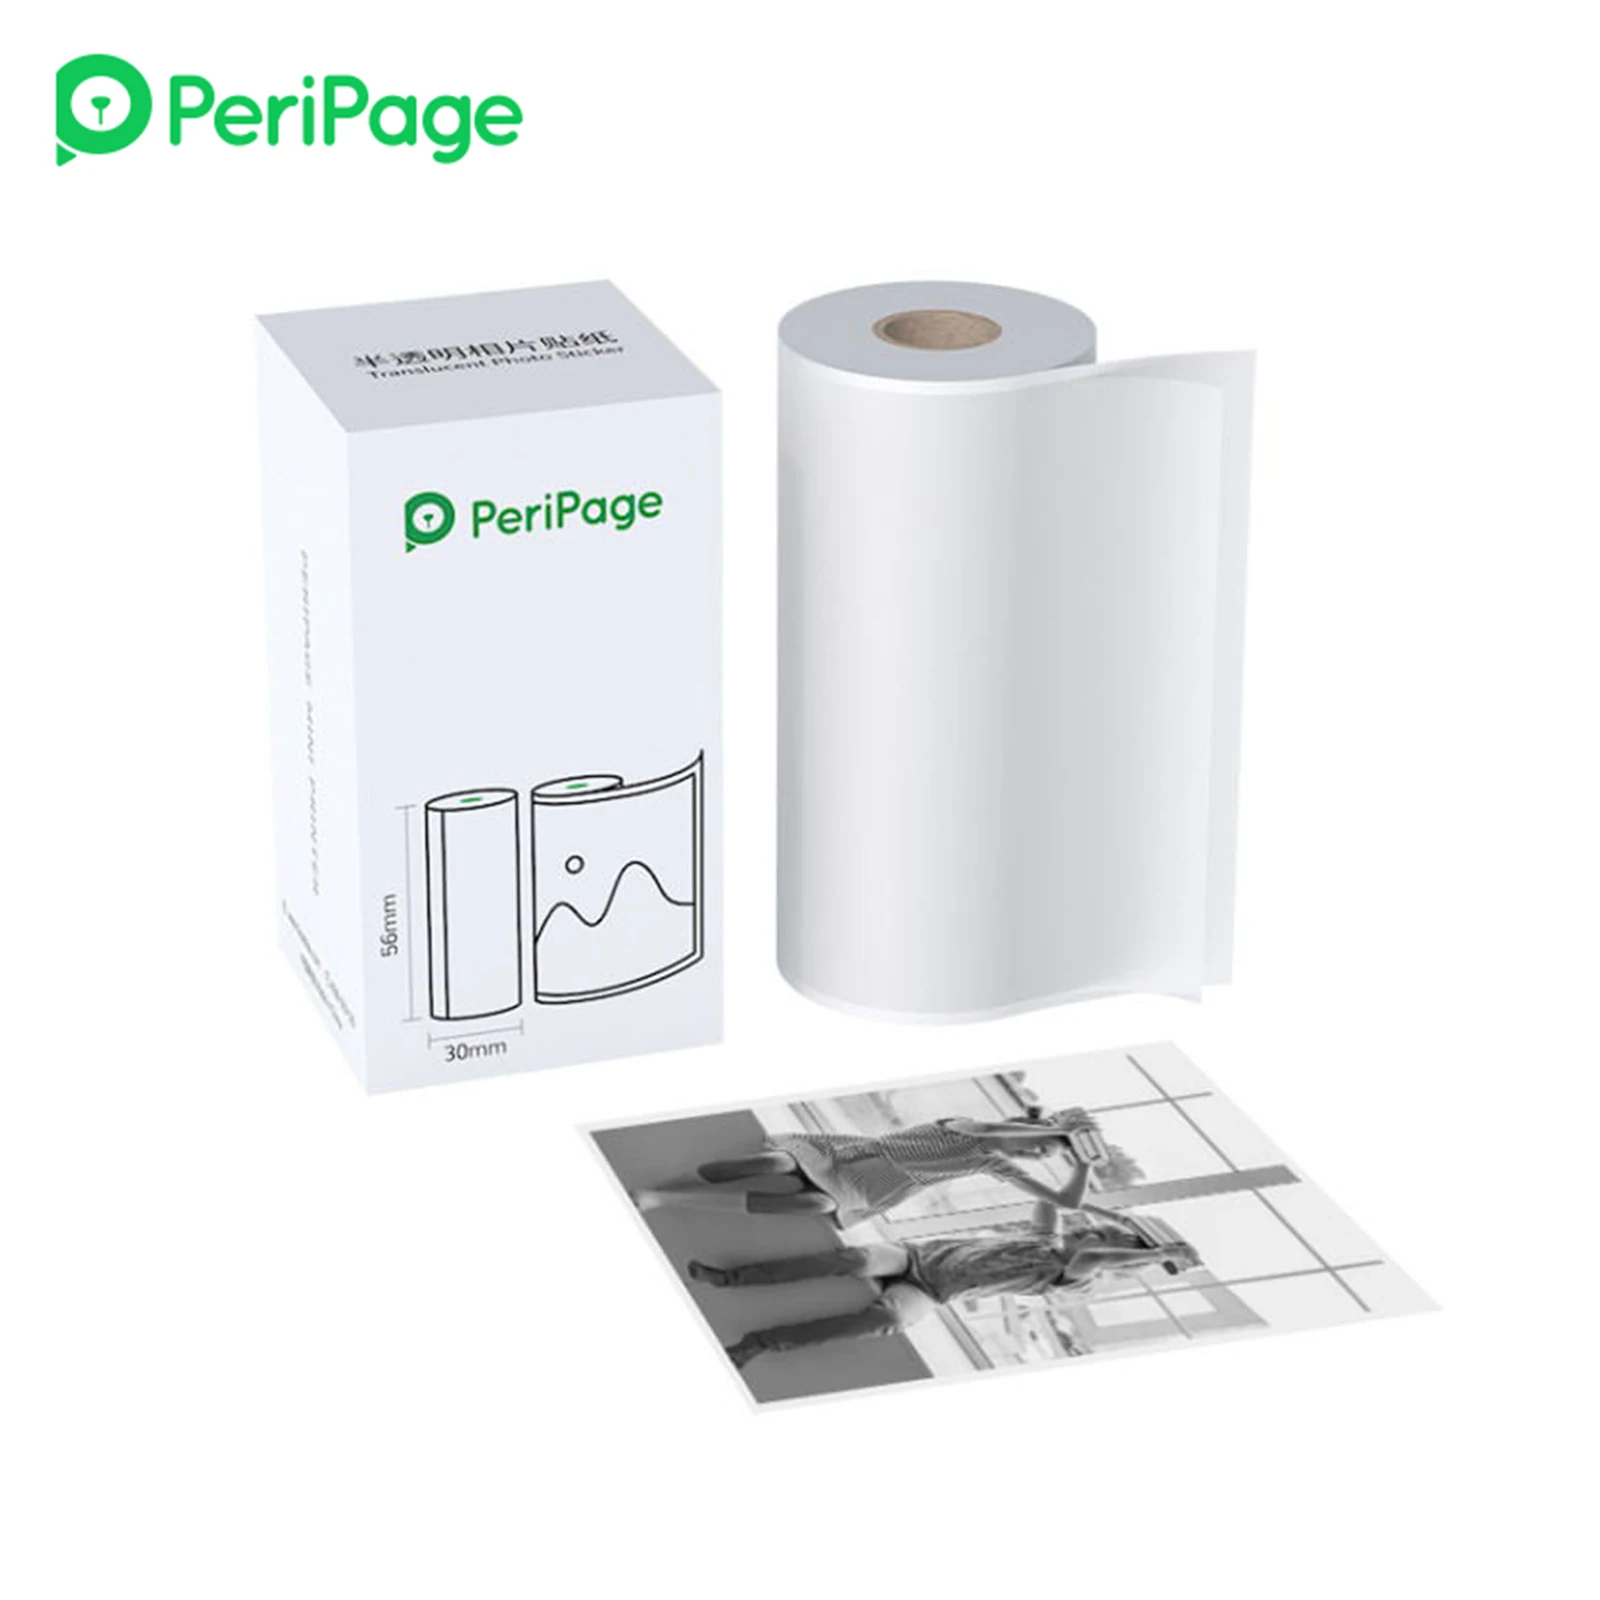 

PeriPage Translucent Photo Sticker BPA-Free Adhesive Thermal Paper Roll Sticky Paper Waterproof for PeriPage A6/A8/A9/A9s/A9 Pro